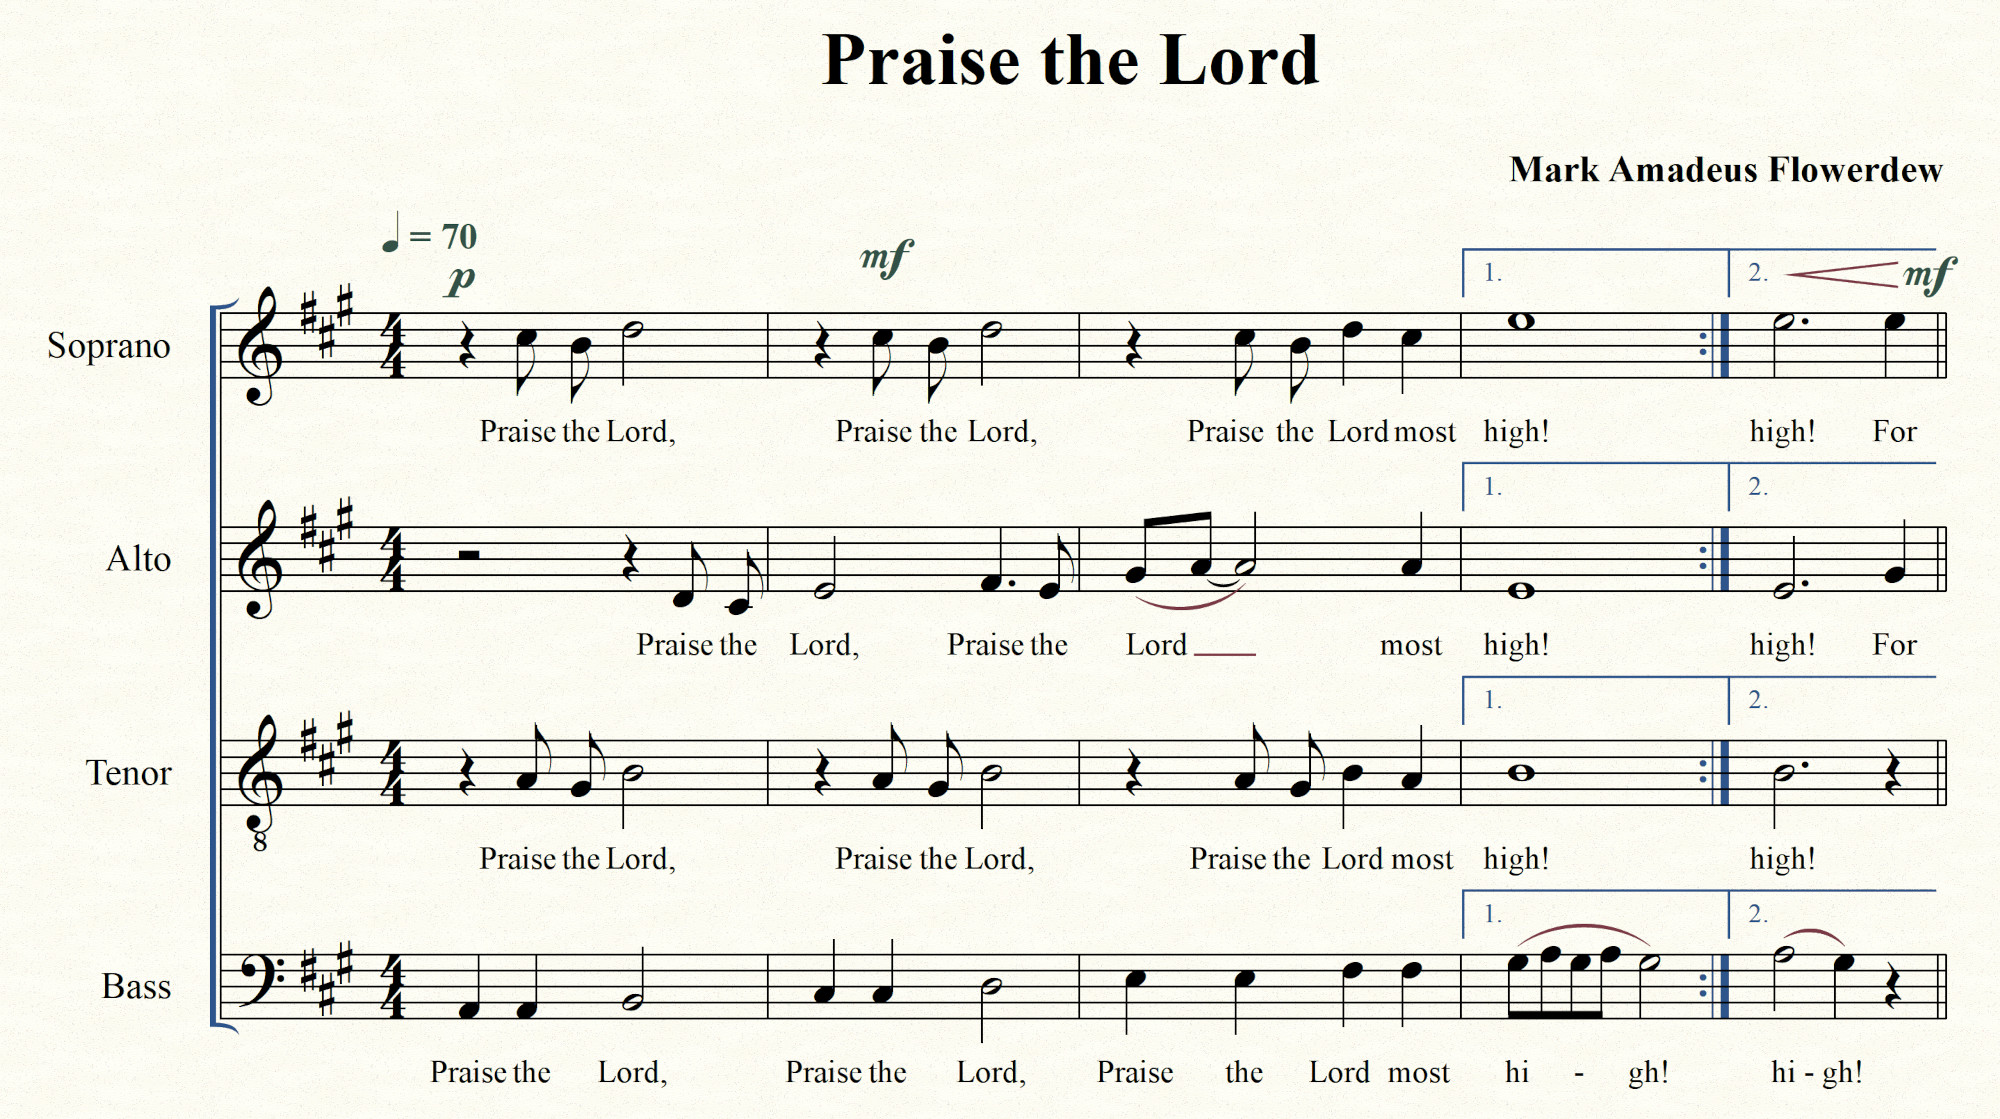 Sheet music excerpt from Praise the Lord by composer Mark Amadeus Flowerdew